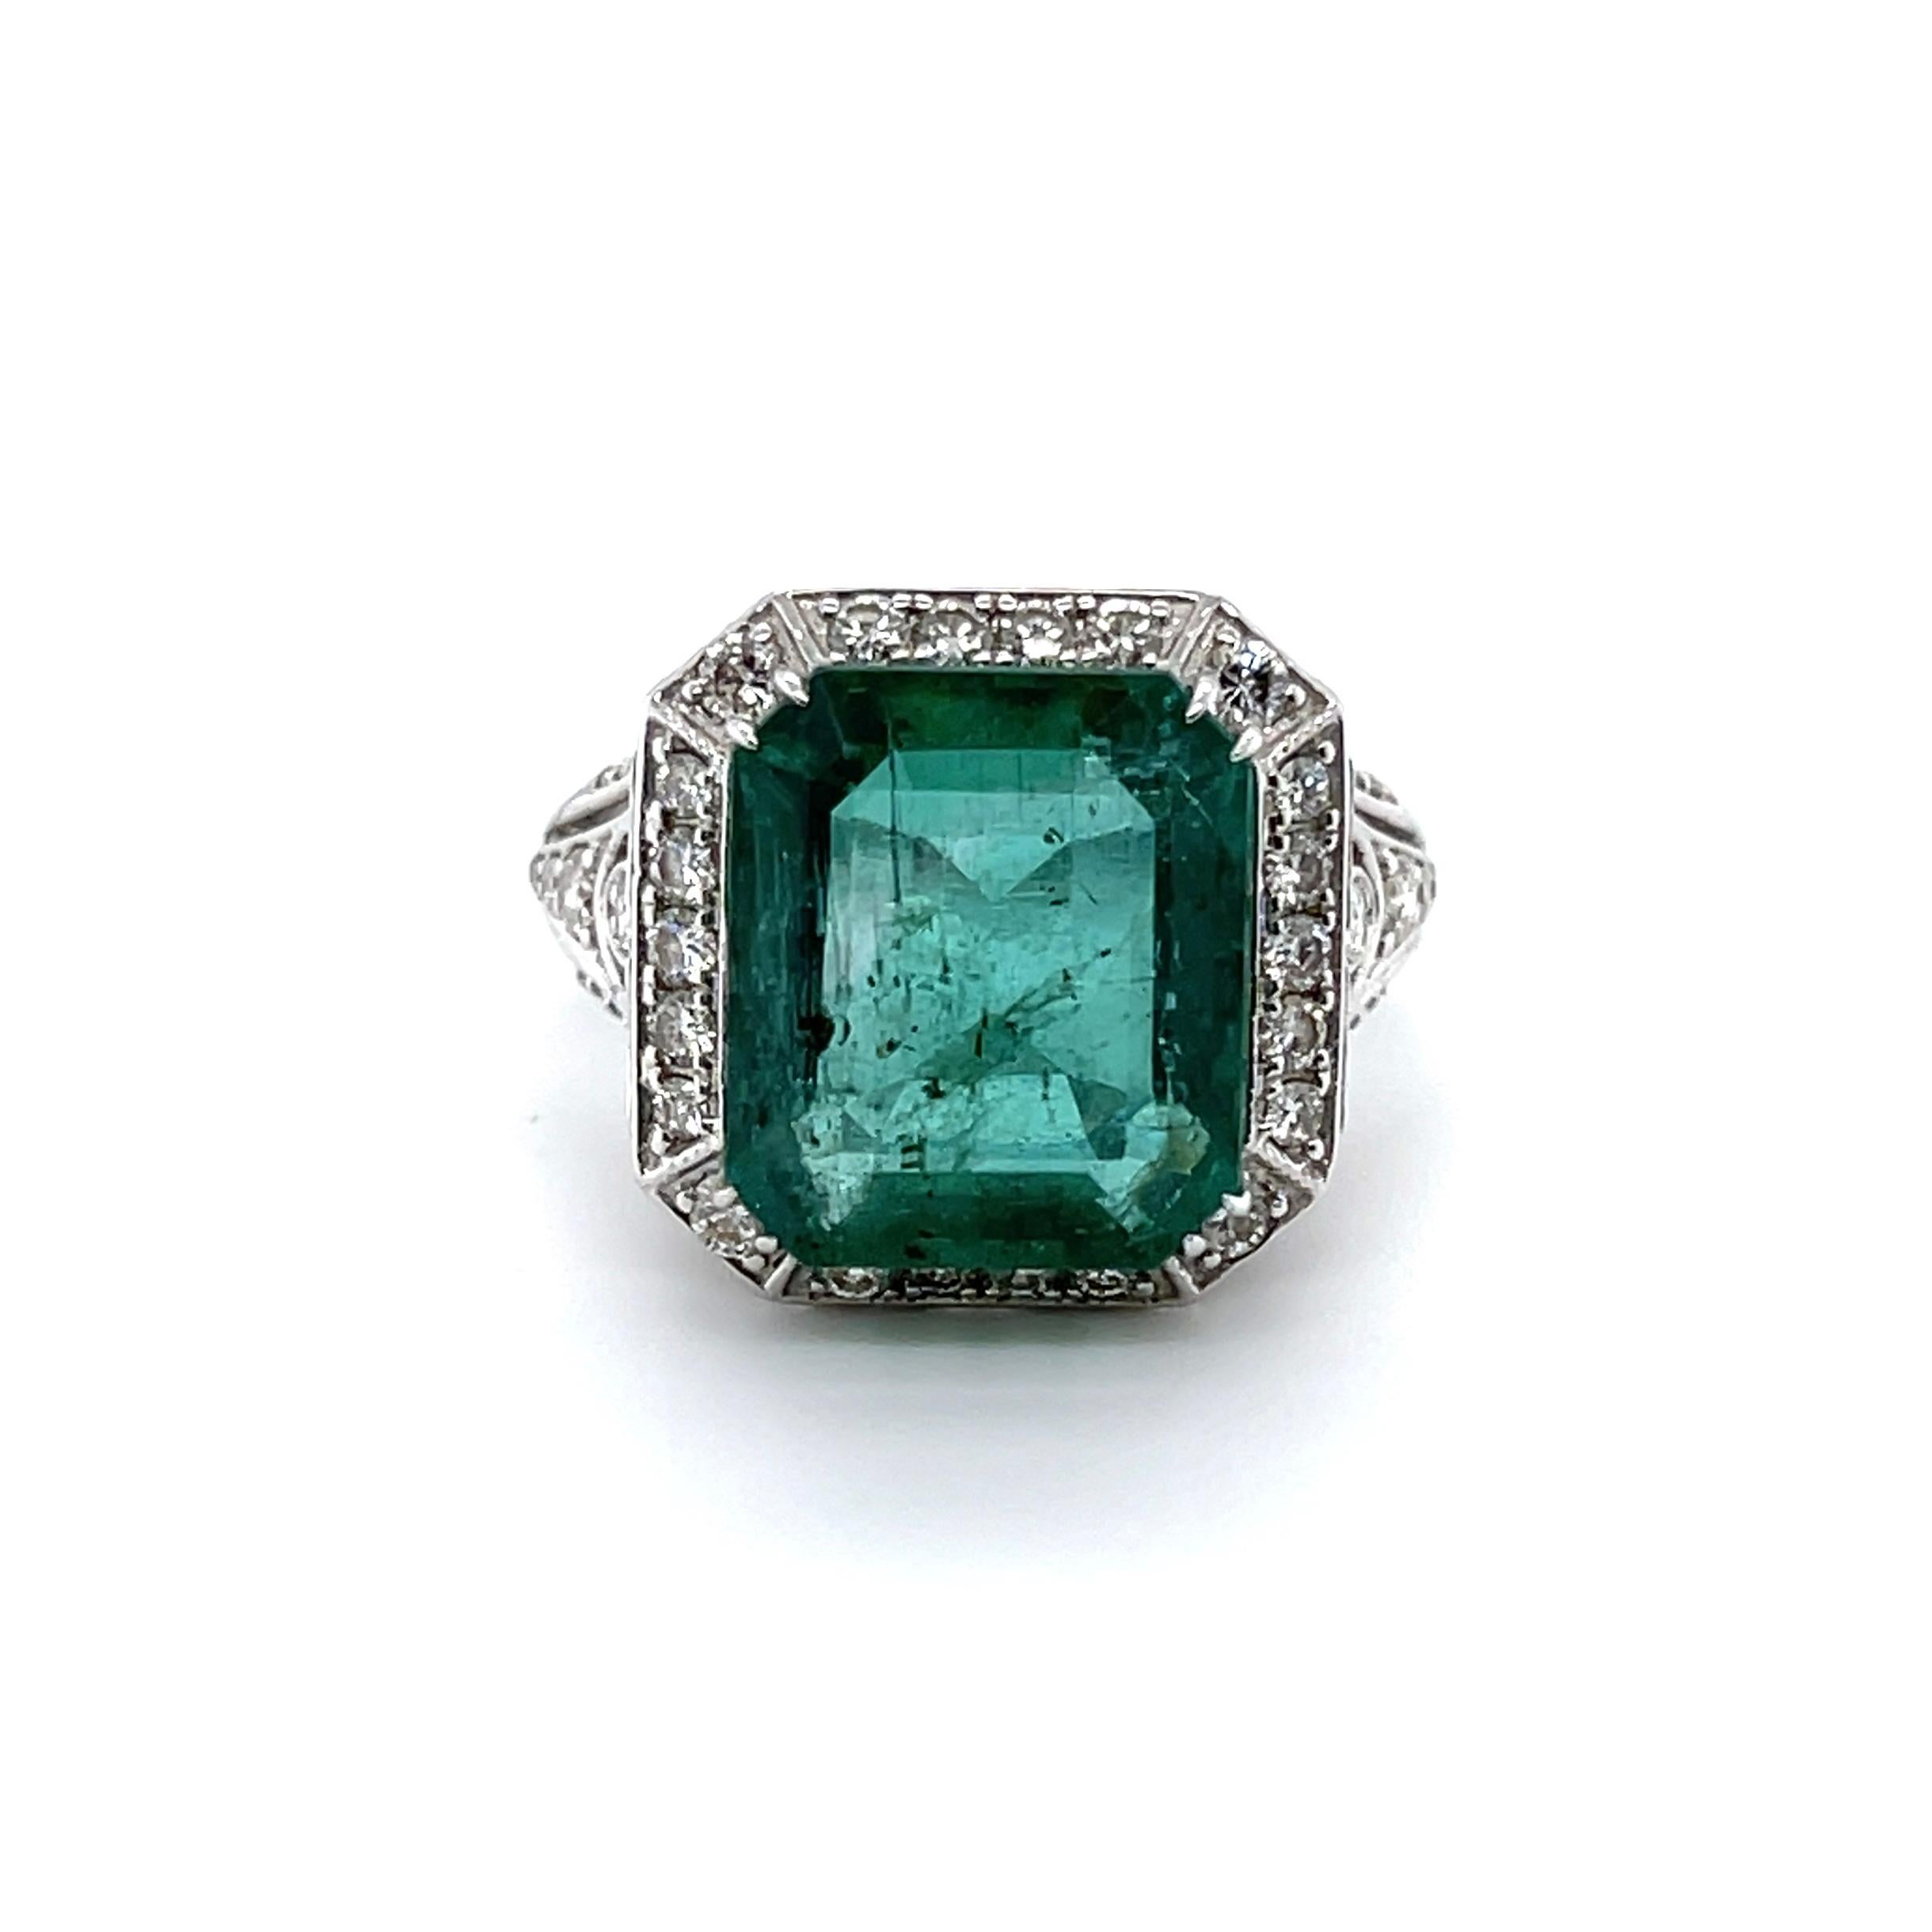 Emerald cut natural emerald, crafted with Eighteen Karat White Gold, featuring a stunning one hundred bead set single cut and round brilliant cut diamonds, complemented by a polished finish design. 

Emerald Weight: 7.86ct

Emerald